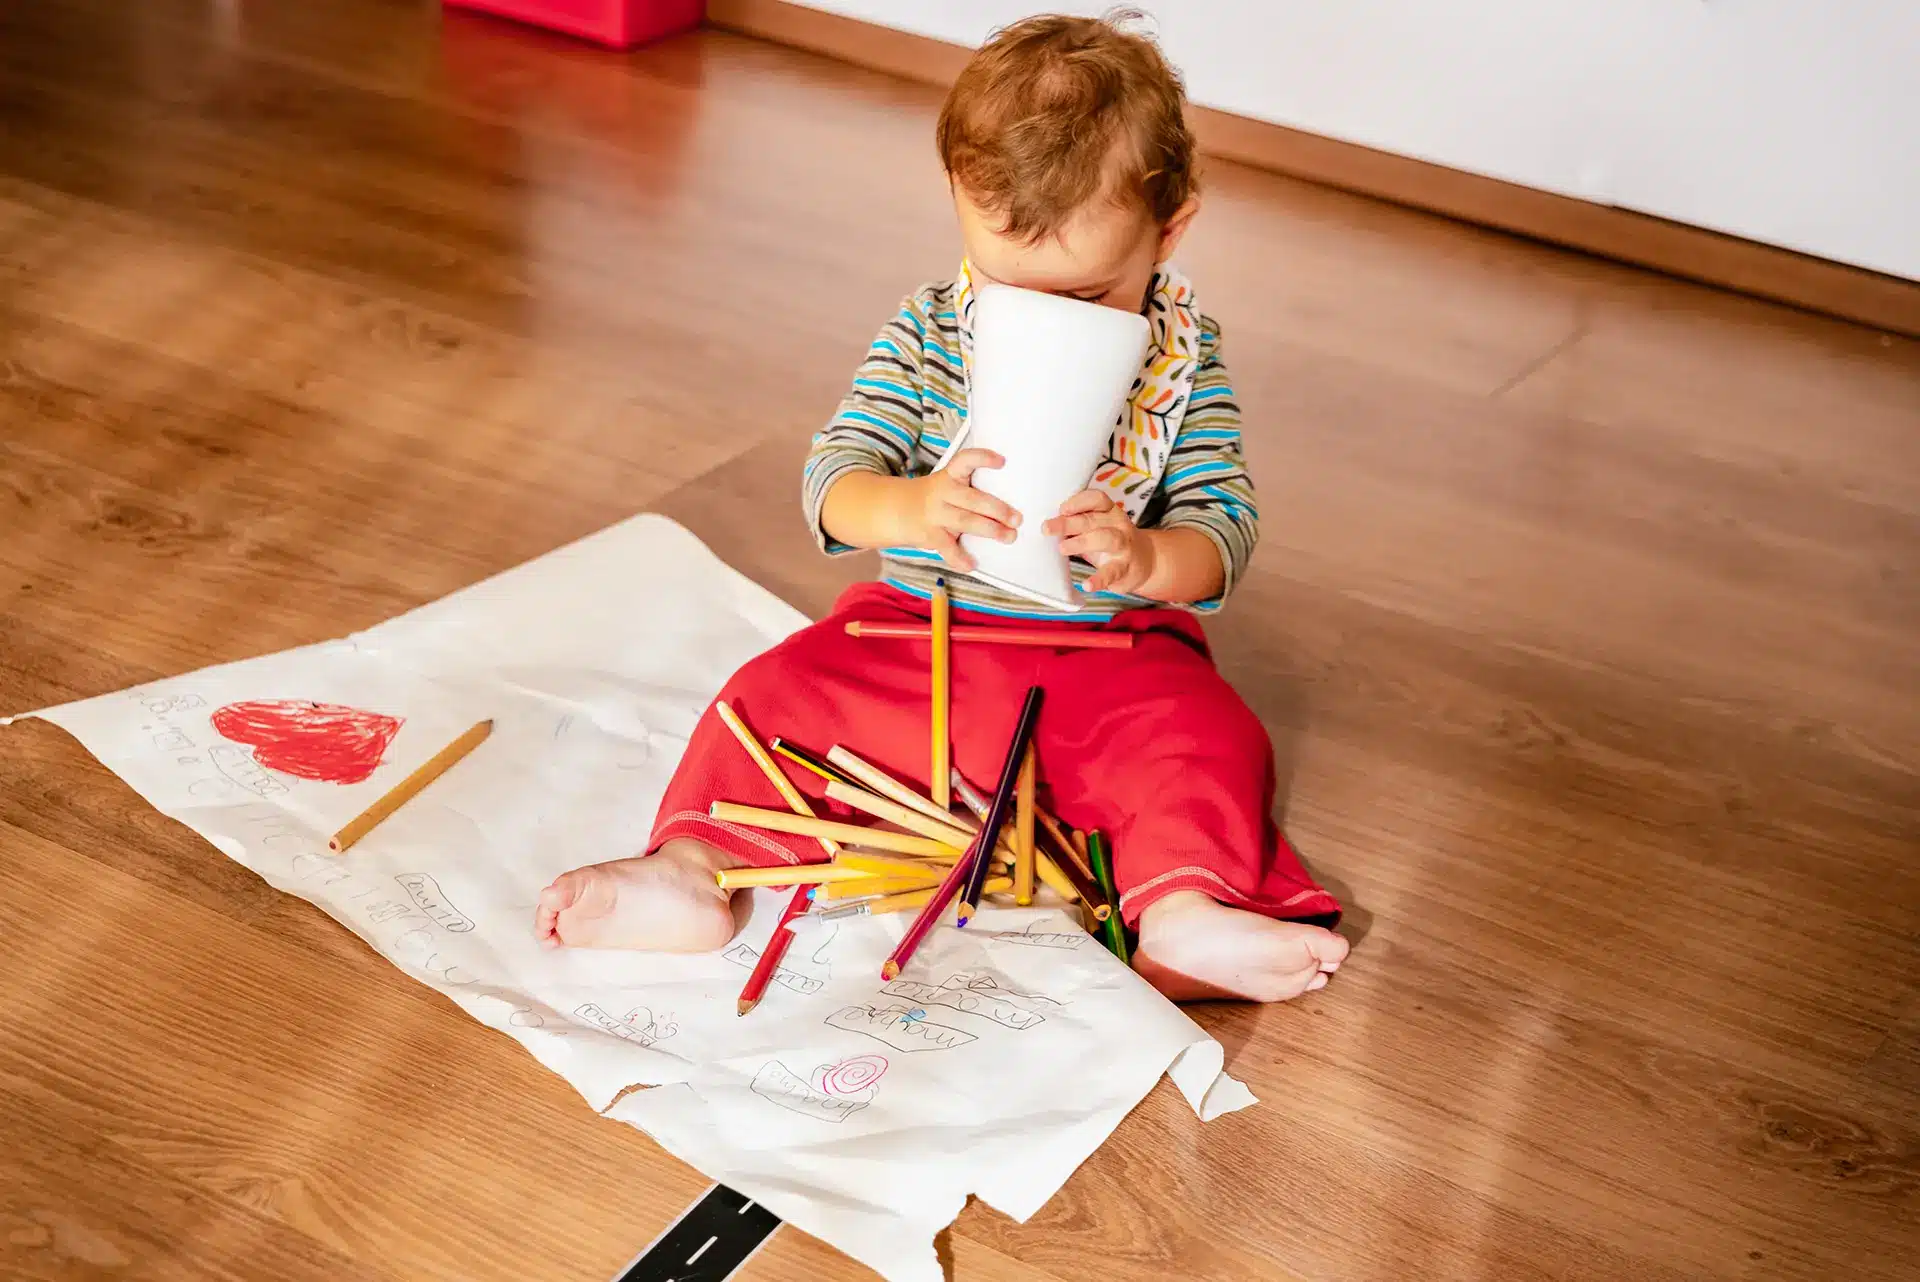 A 1-year-old playing with crayons on a wooden floor.